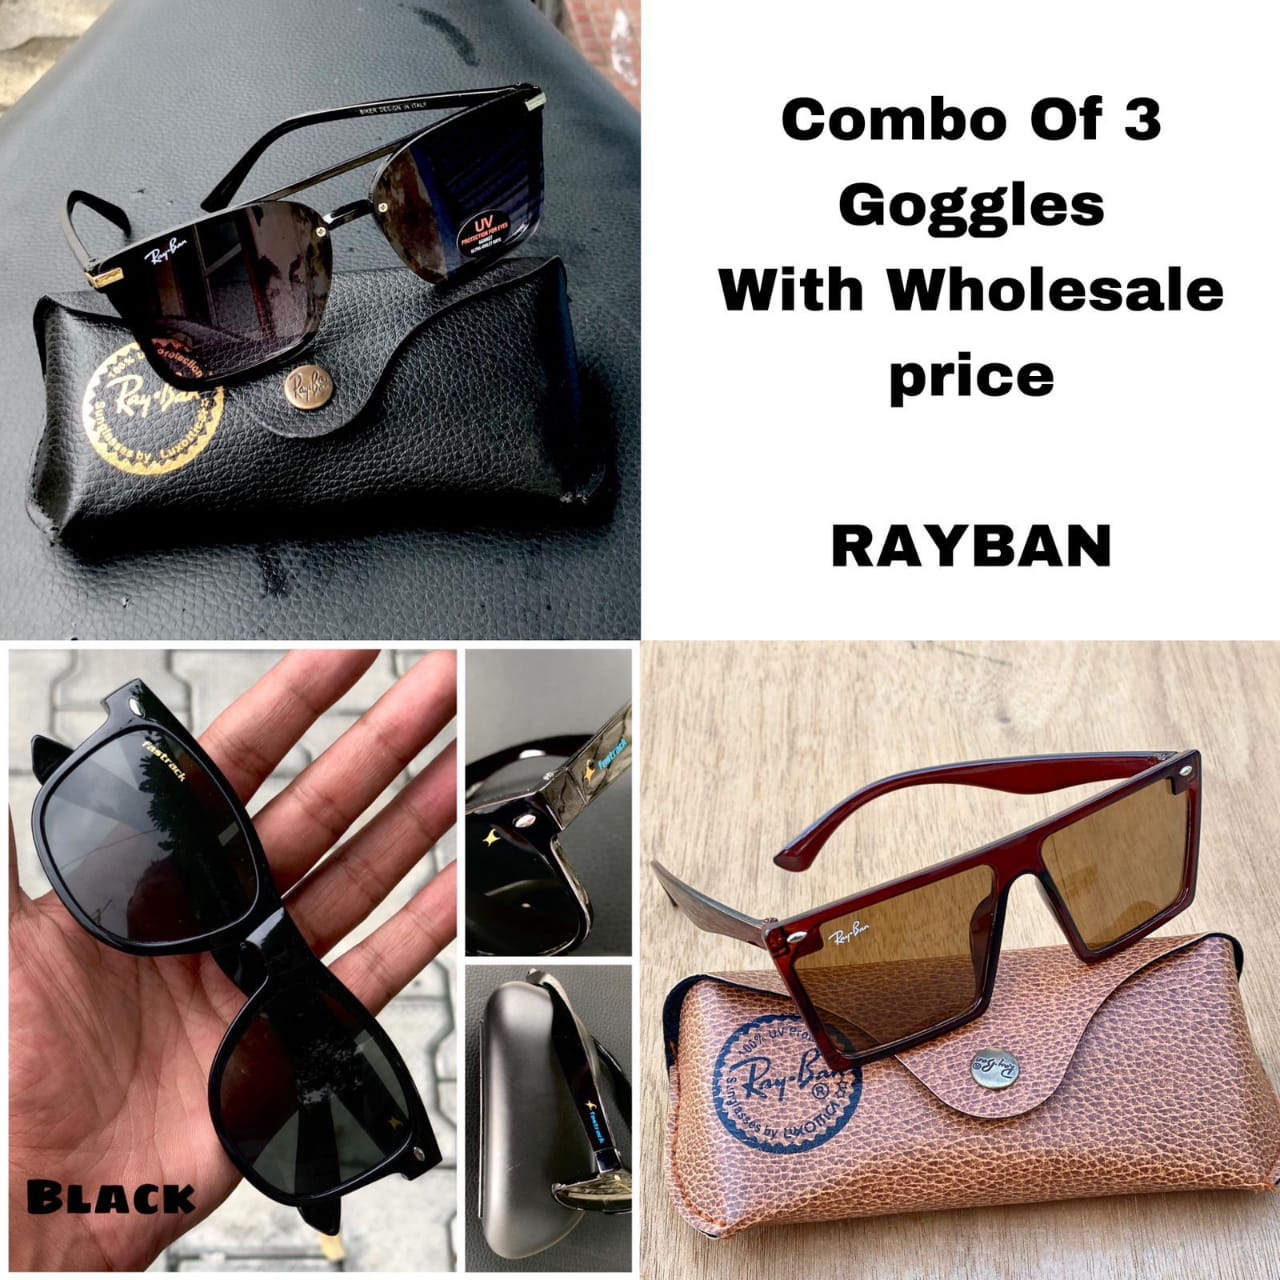 Details View - Rayban sunglasses photos - reseller,reseller marketplace,advetising your products,reseller bazzar,resellerbazzar.in,india's classified site,Rayban sunglasses | Rayban sunglasses in surat | Rayban sunglasses in gujarat